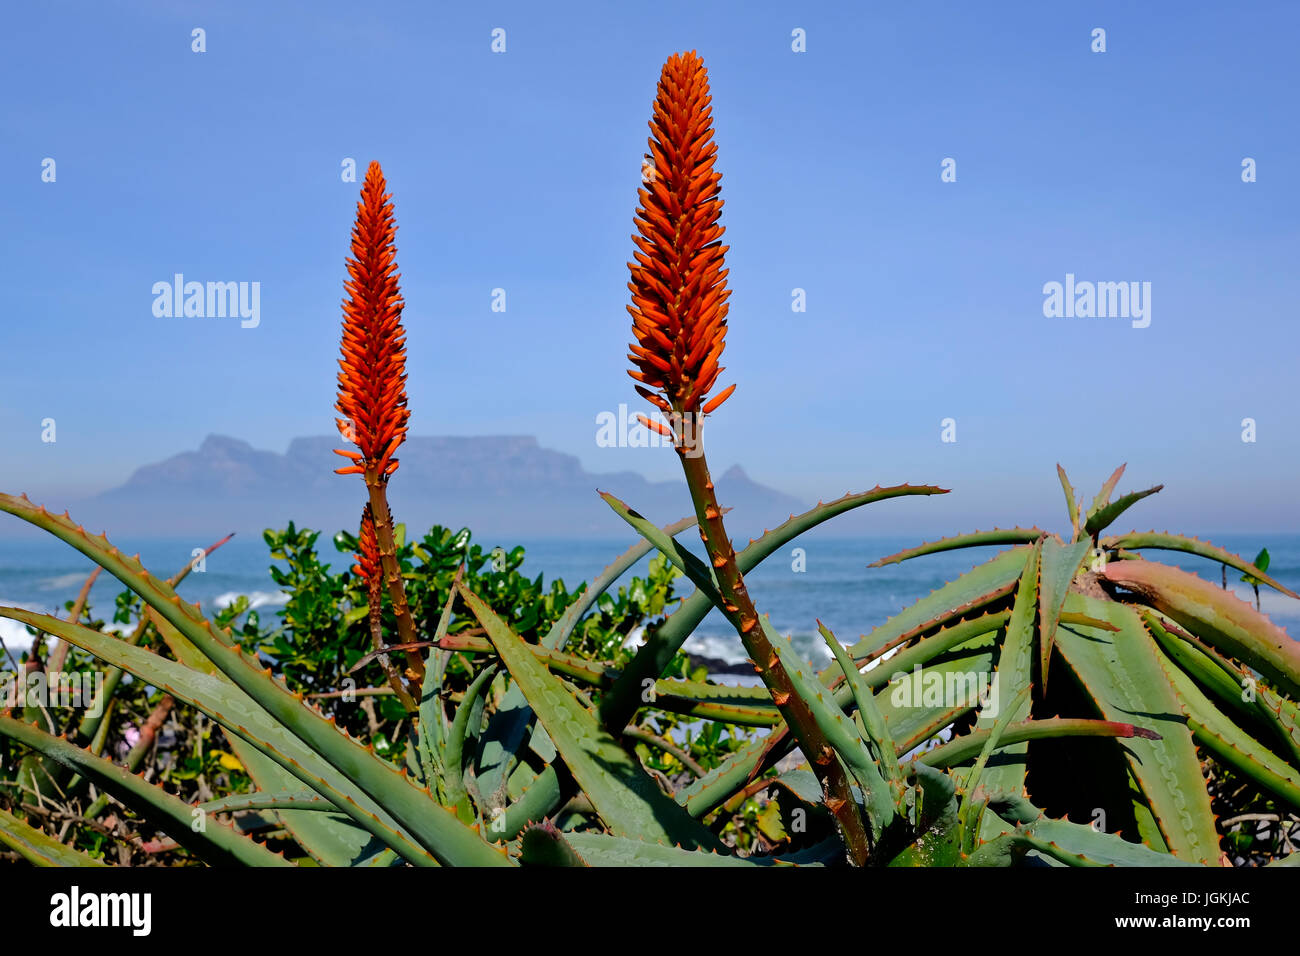 Cape Town,South Africa. Aloes (Aloe arborescens) flowering on the seashore with Table Mountain in the background. Stock Photo